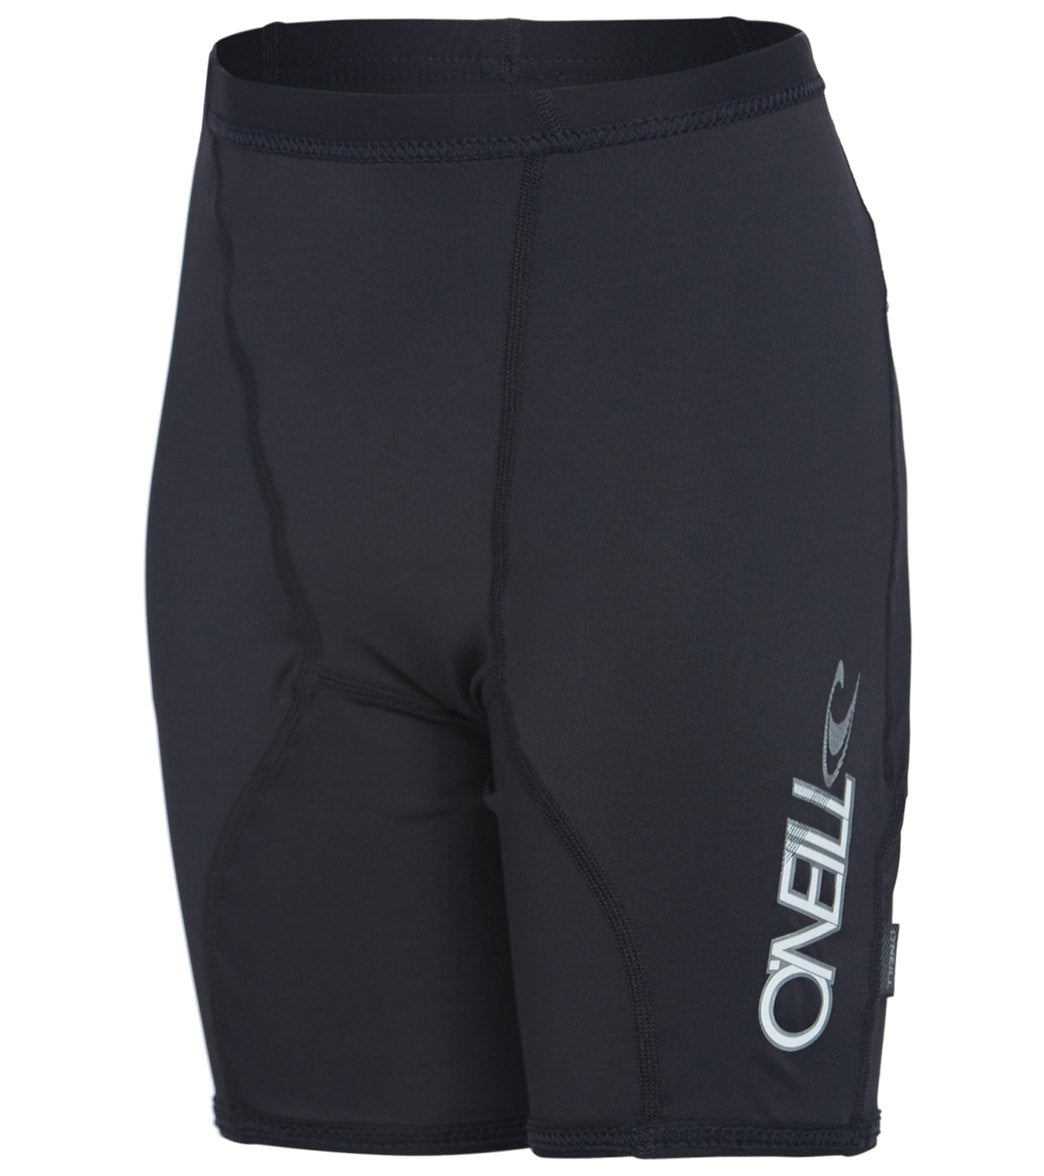 O'neill Boys' All Day Undershorts - Black 6 - Swimoutlet.com